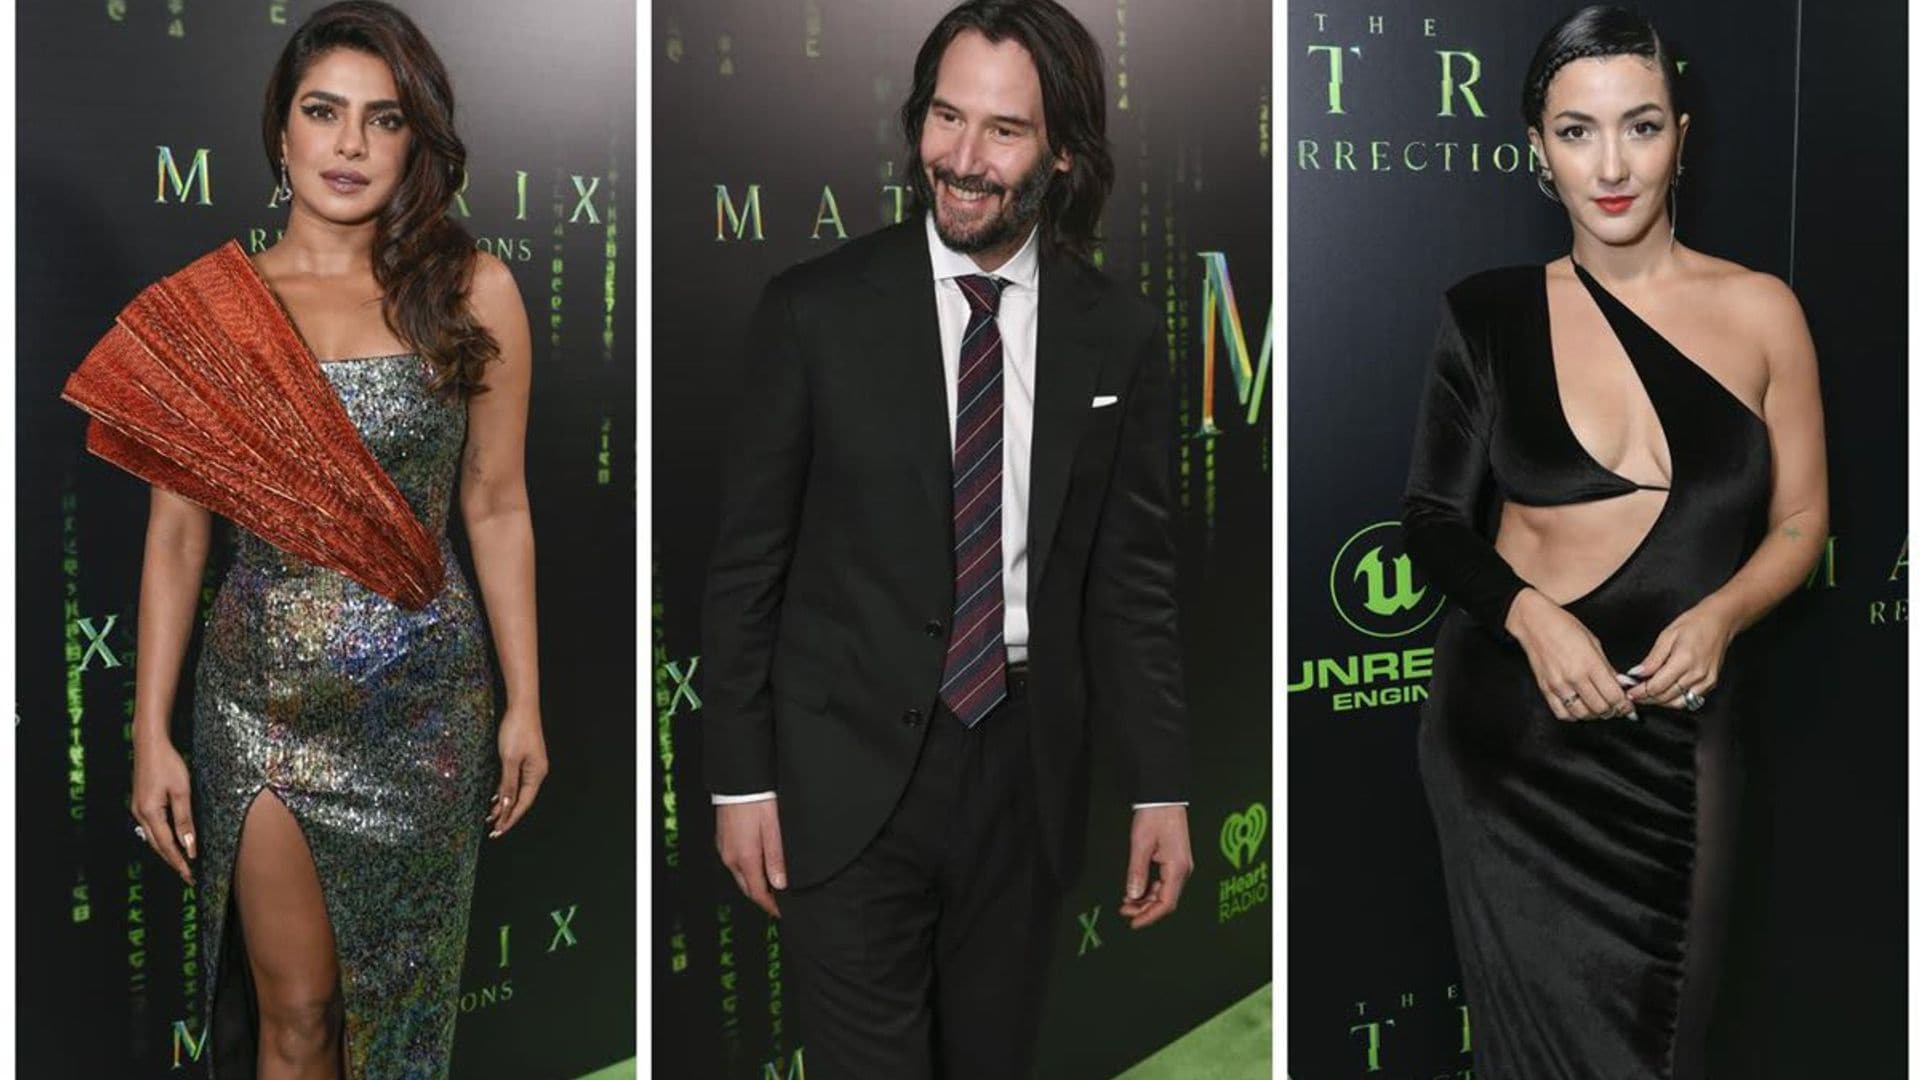 ‘The Matrix Resurrections‘ cast looked futuristic and amazing at the San Francisco premiere